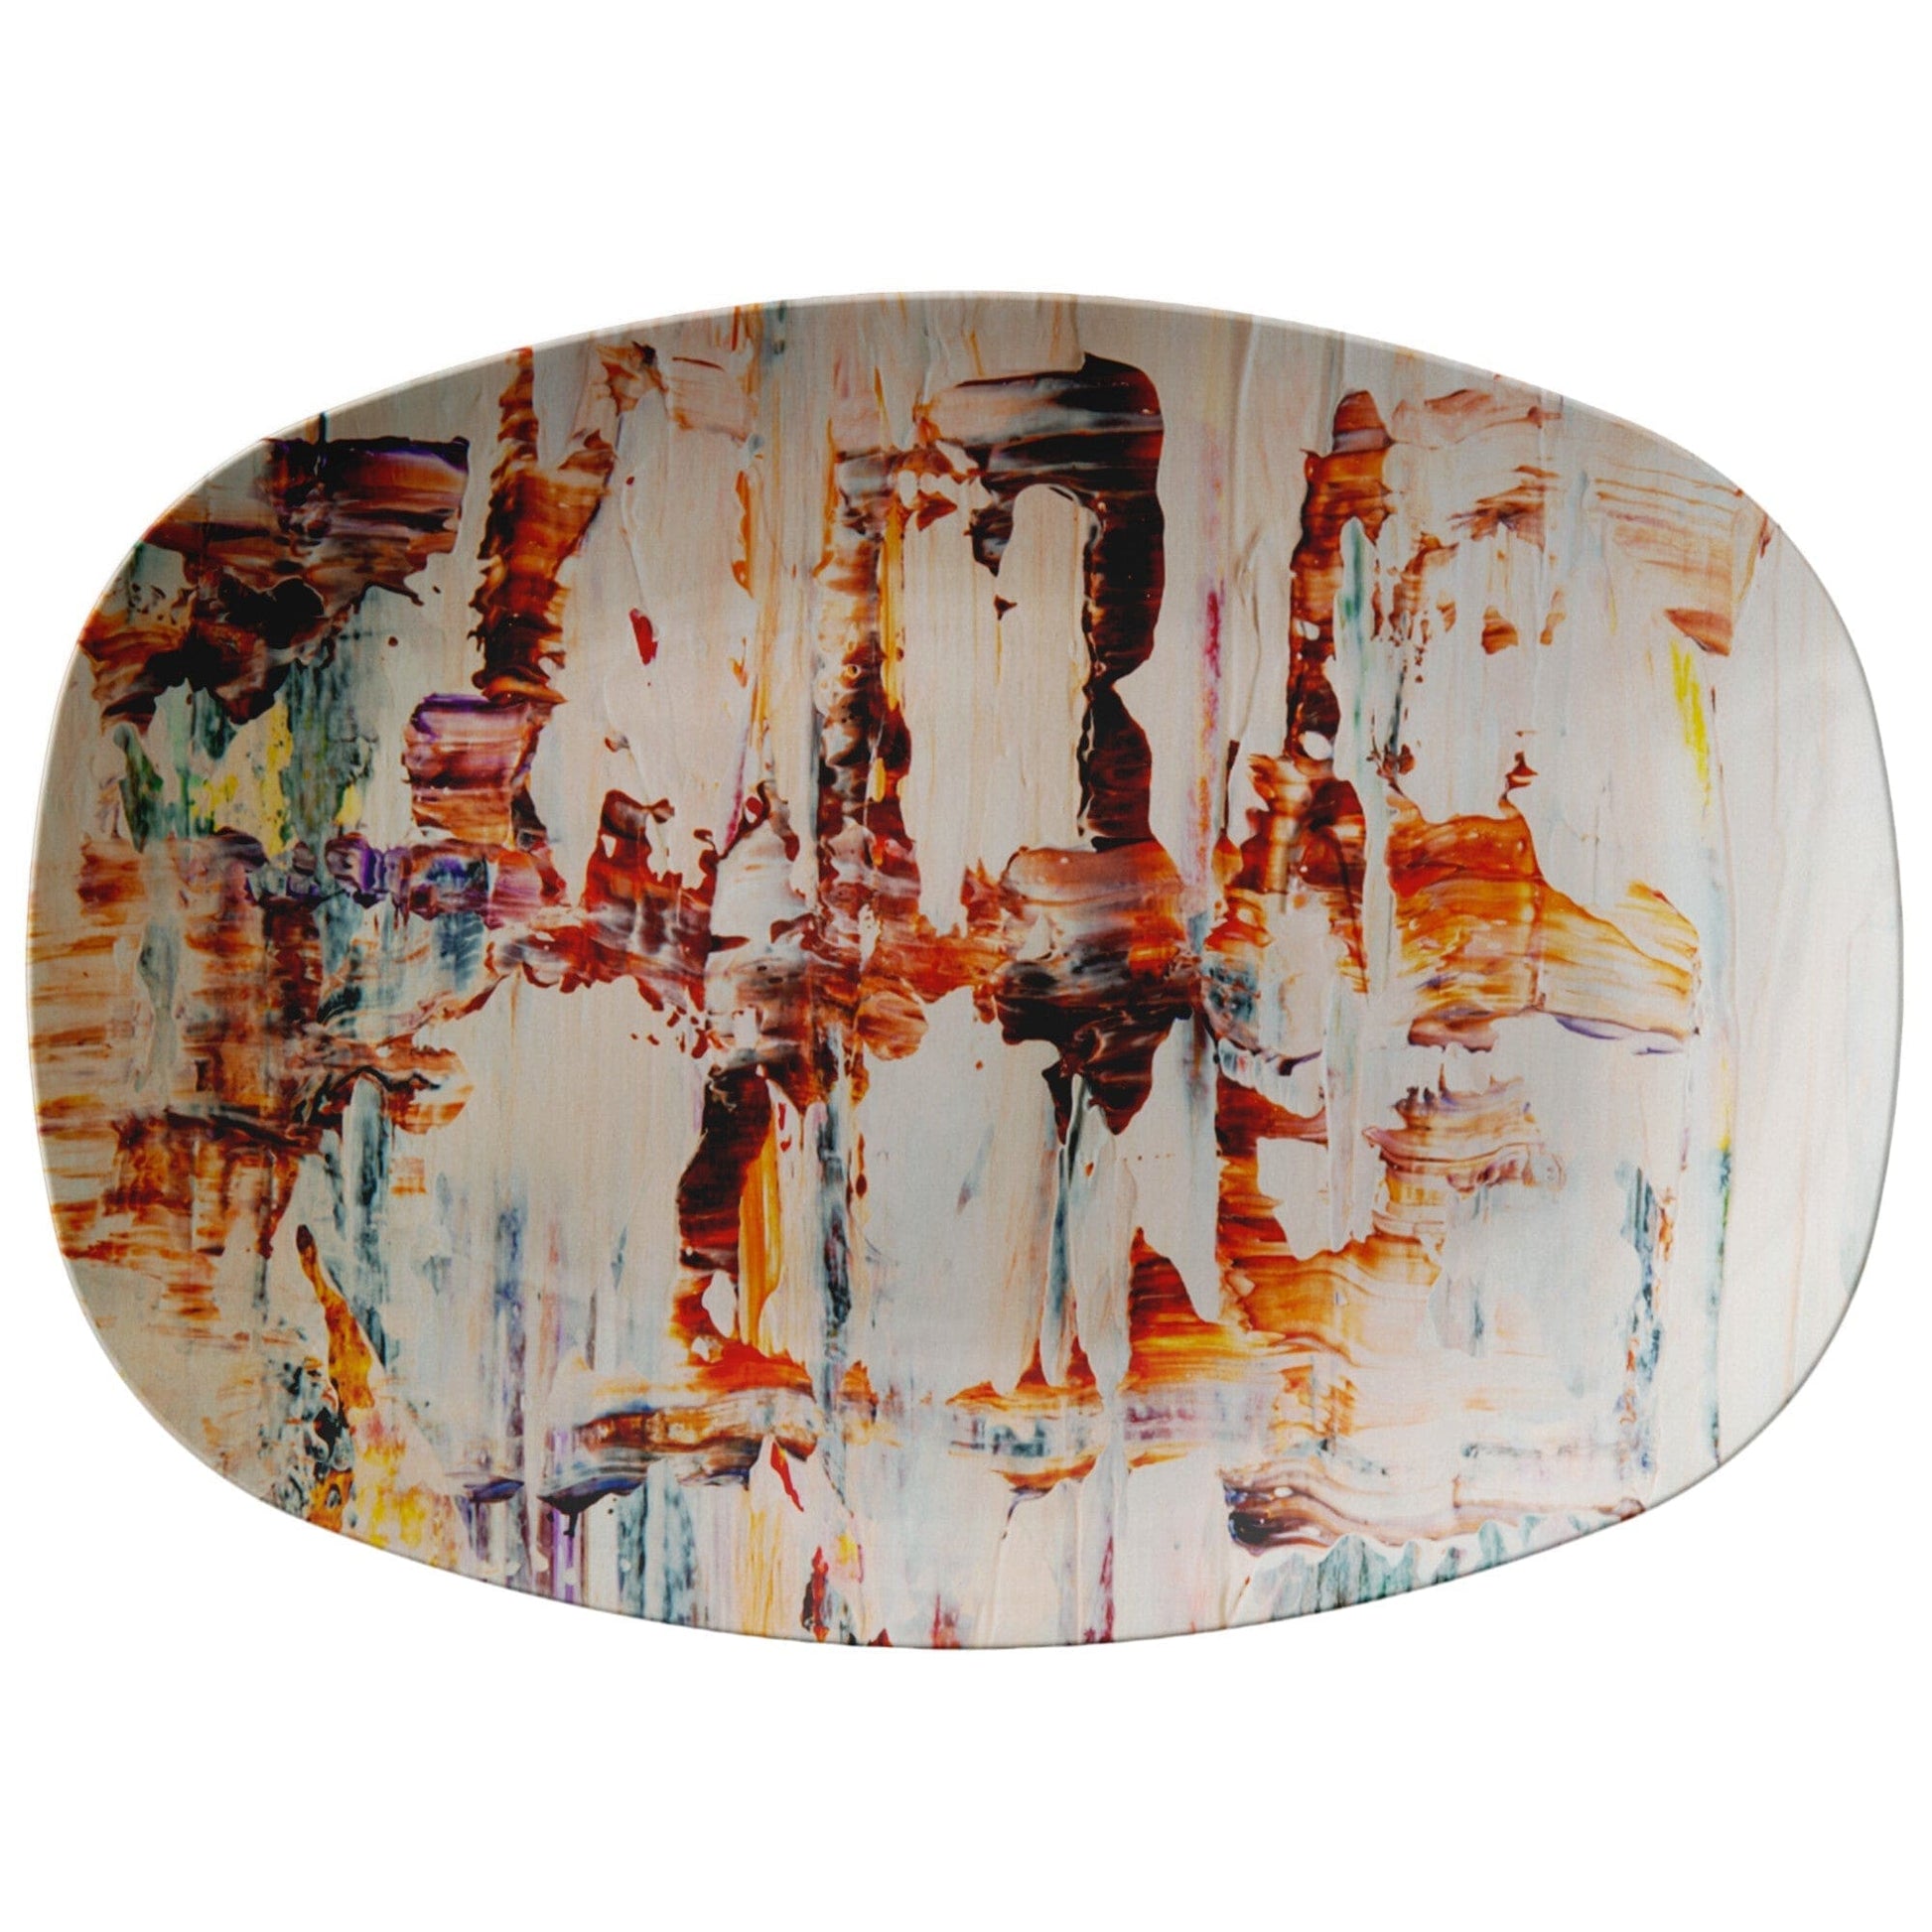 Kate McEnroe New York Serving Platter in Contemporary Abstract Art Serving Platters 9727